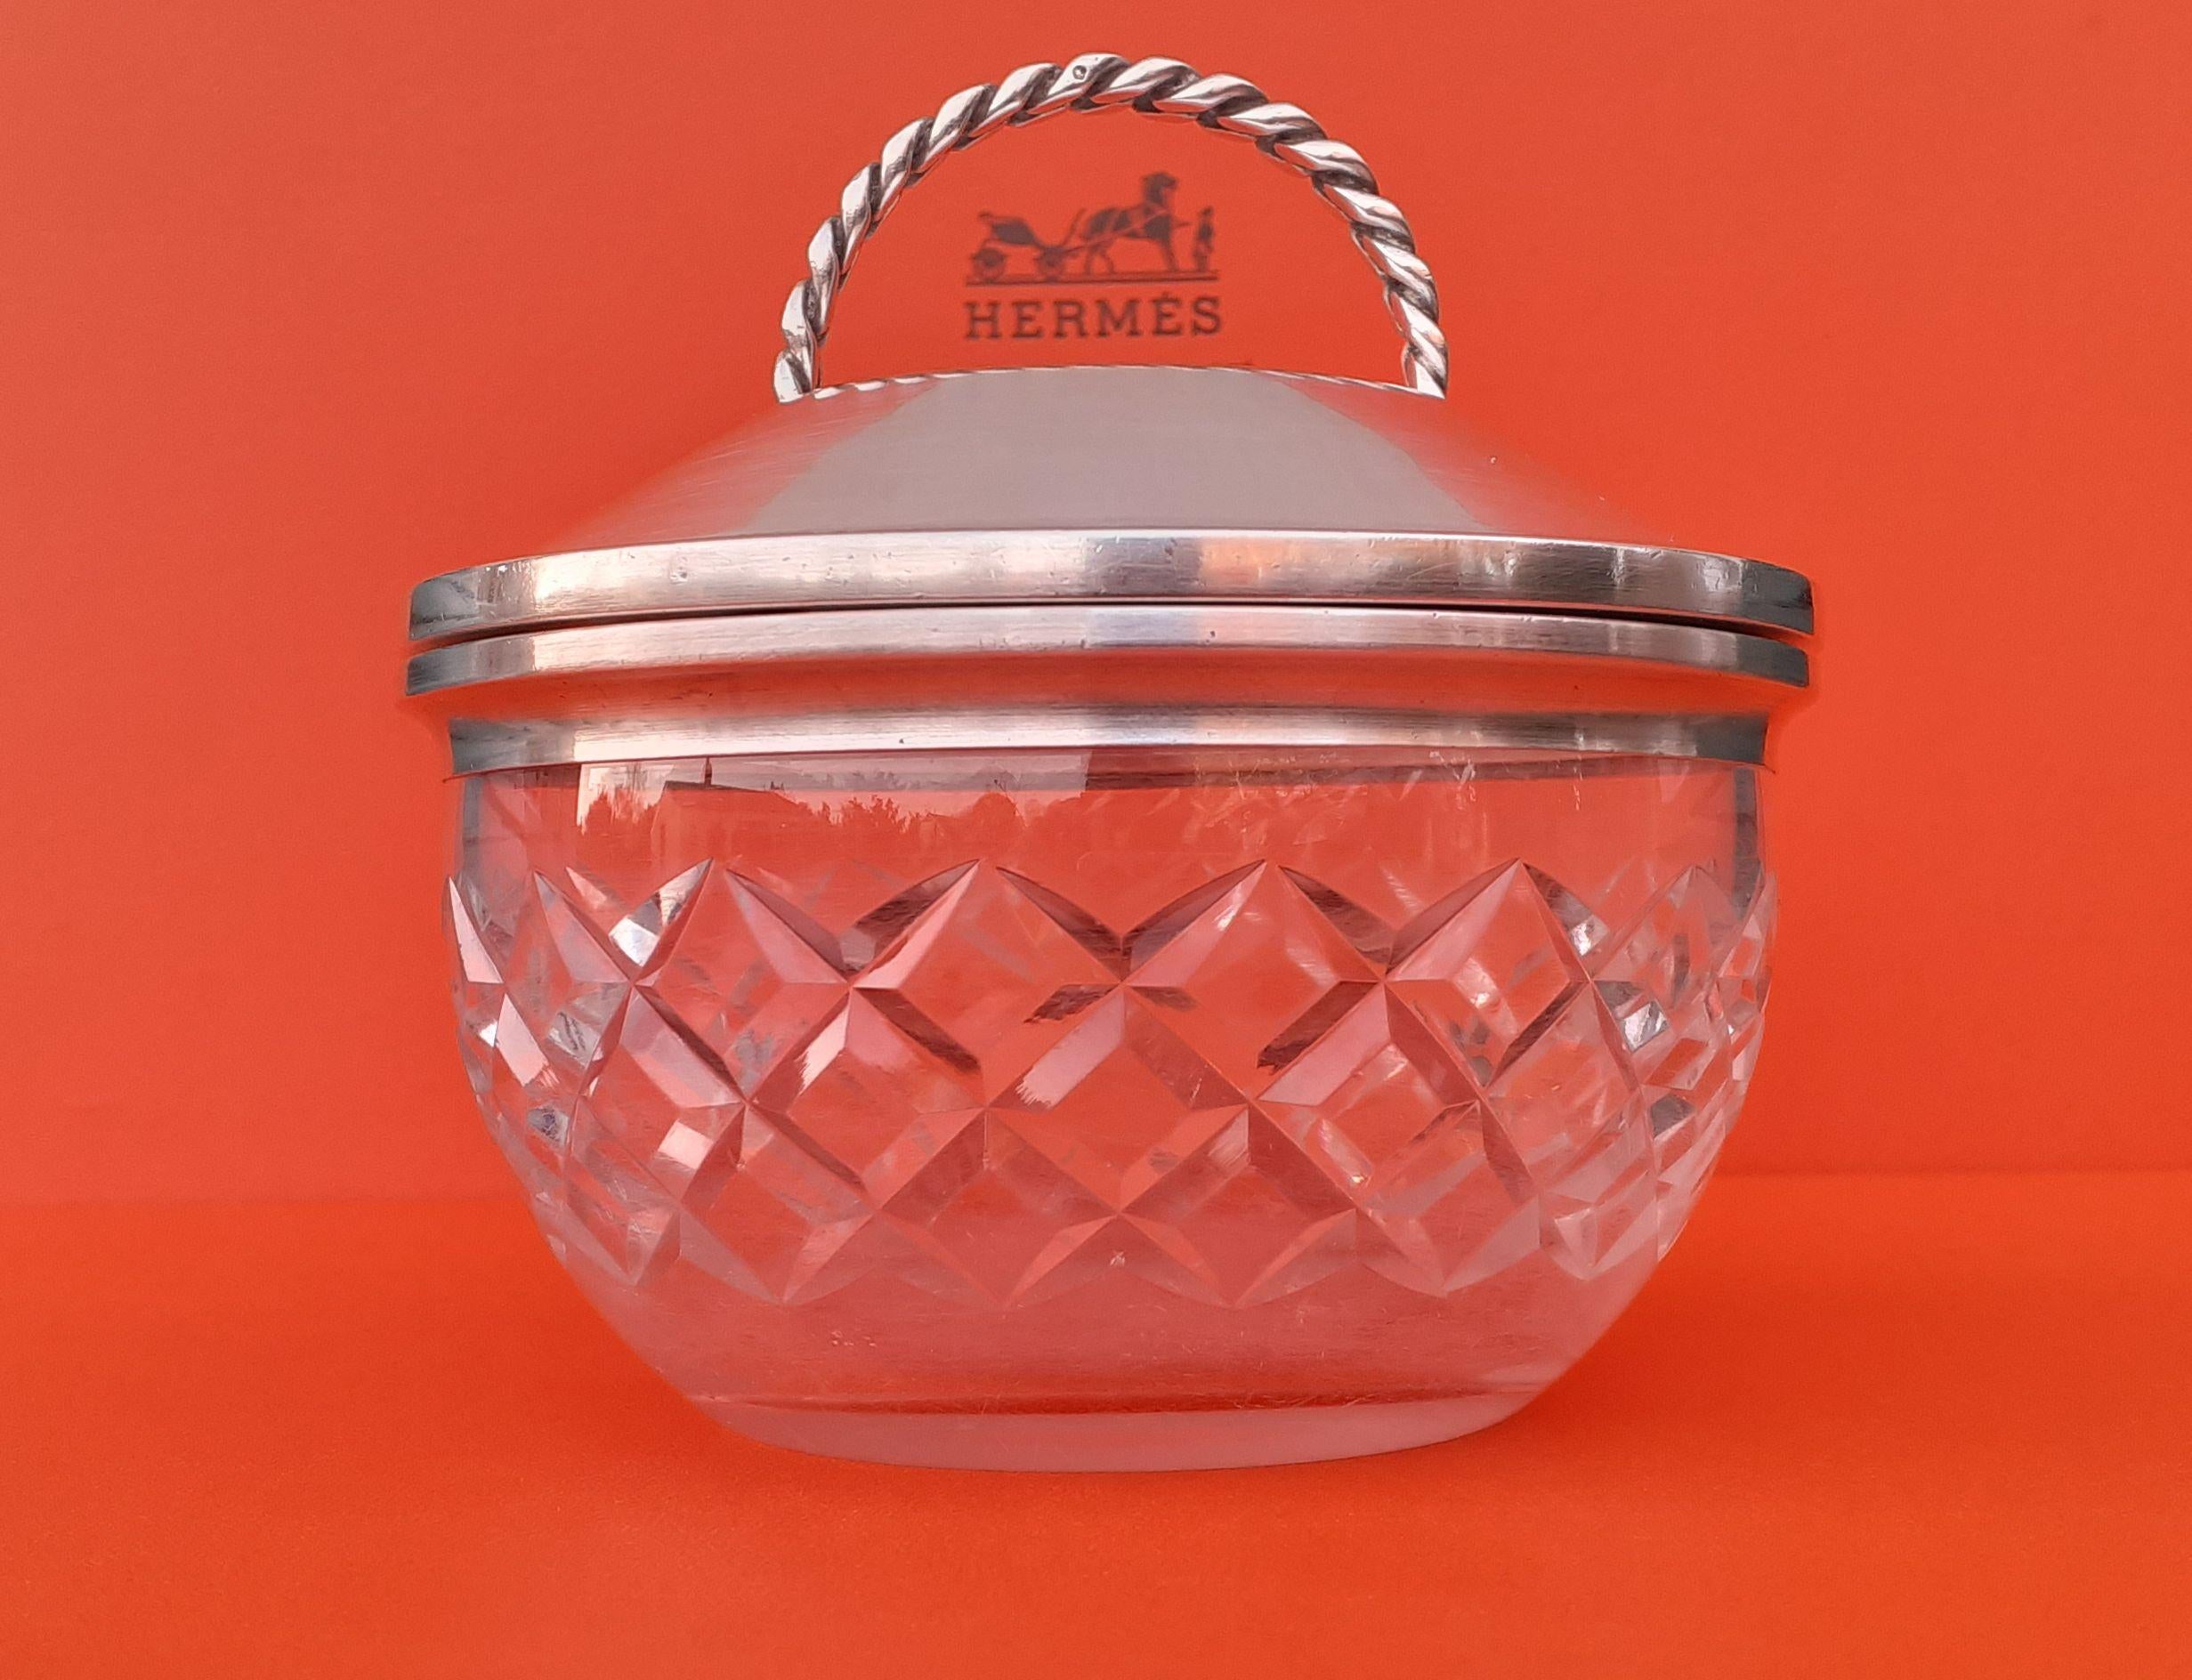 Exceptional Authentic Hermès Dish

Can be used to store your sweets, cakes, jewelry etc ...

Made in France

Vintage item

Made of Glass and Silver

The glass jar is made of thick and resistant glass, decorated with squares cut in the mass

The